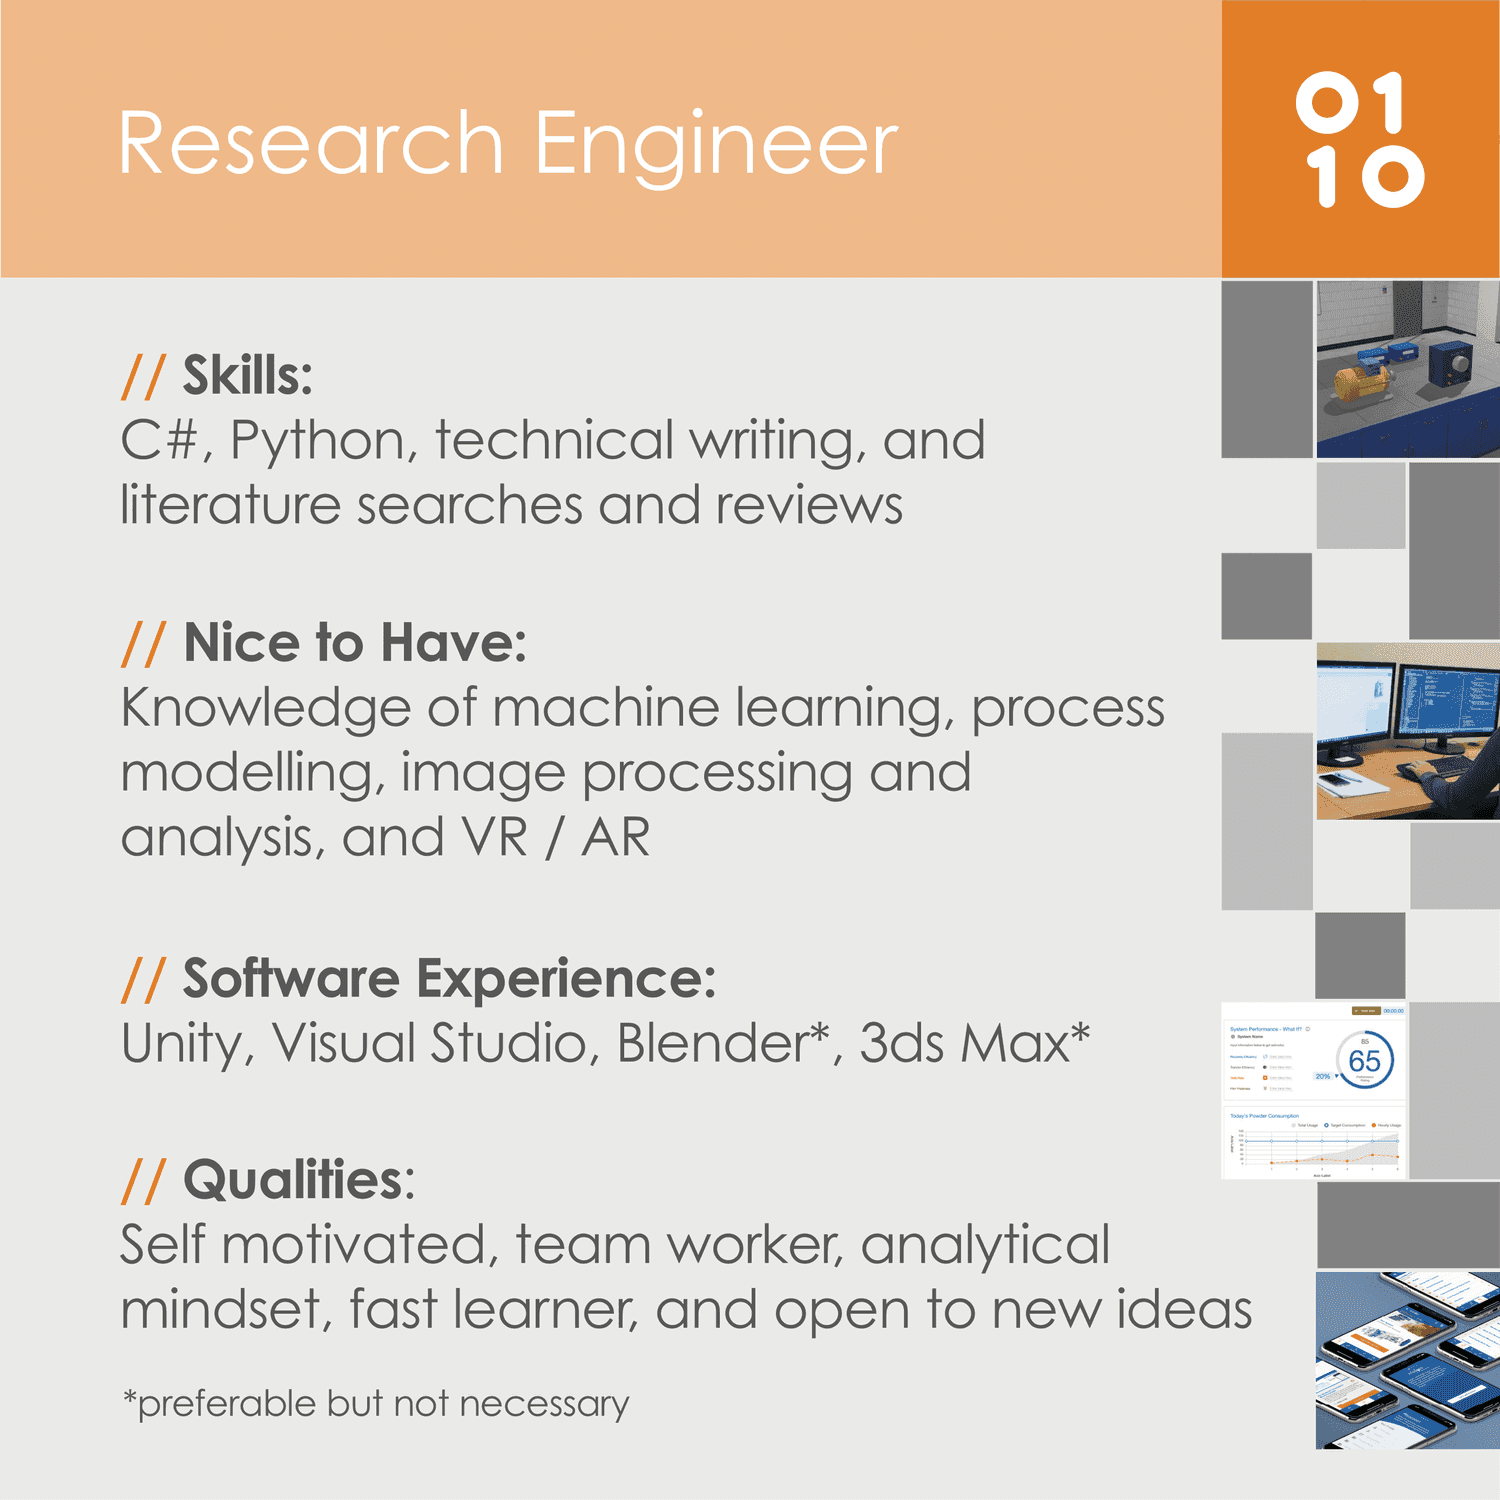 Research Engineer